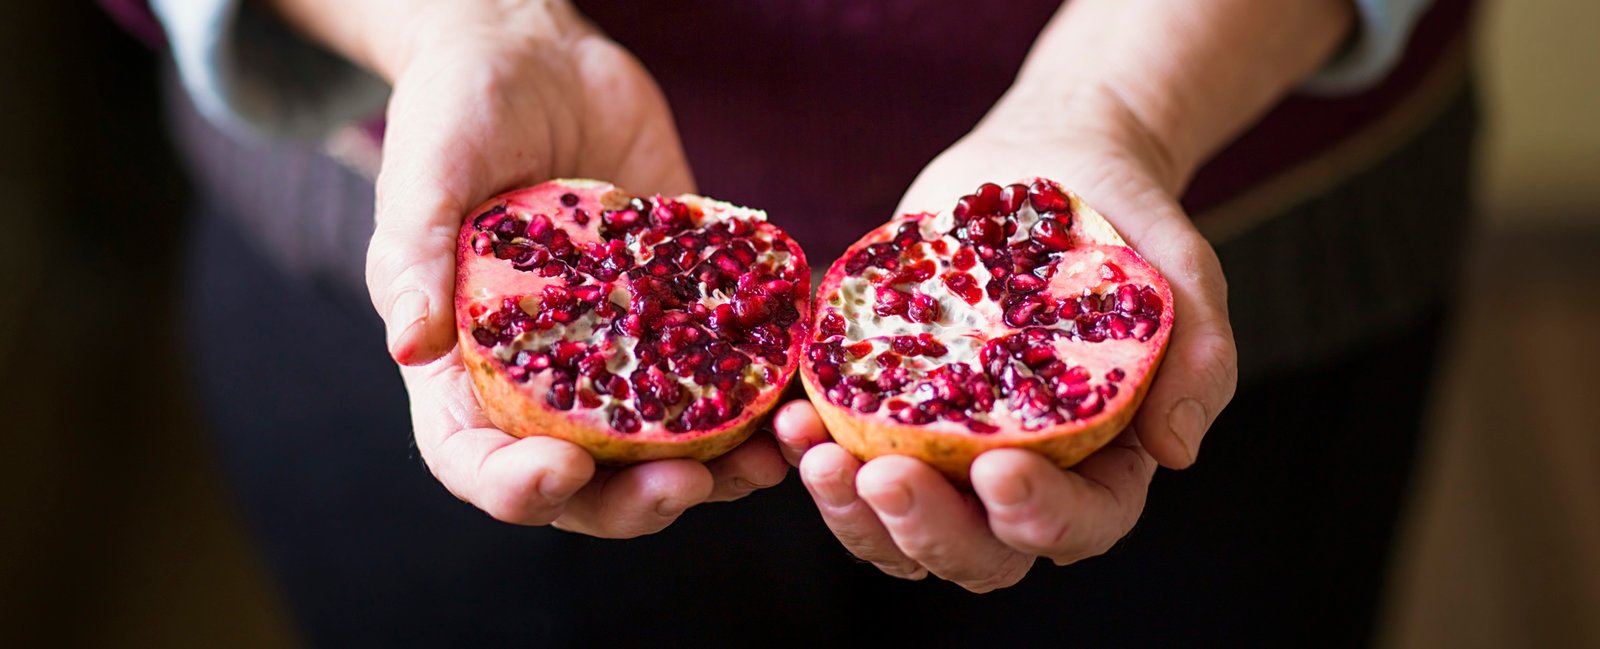 Something In Pomegranates May Help The Brain Stave Off Alzheimer’s : ScienceAlert